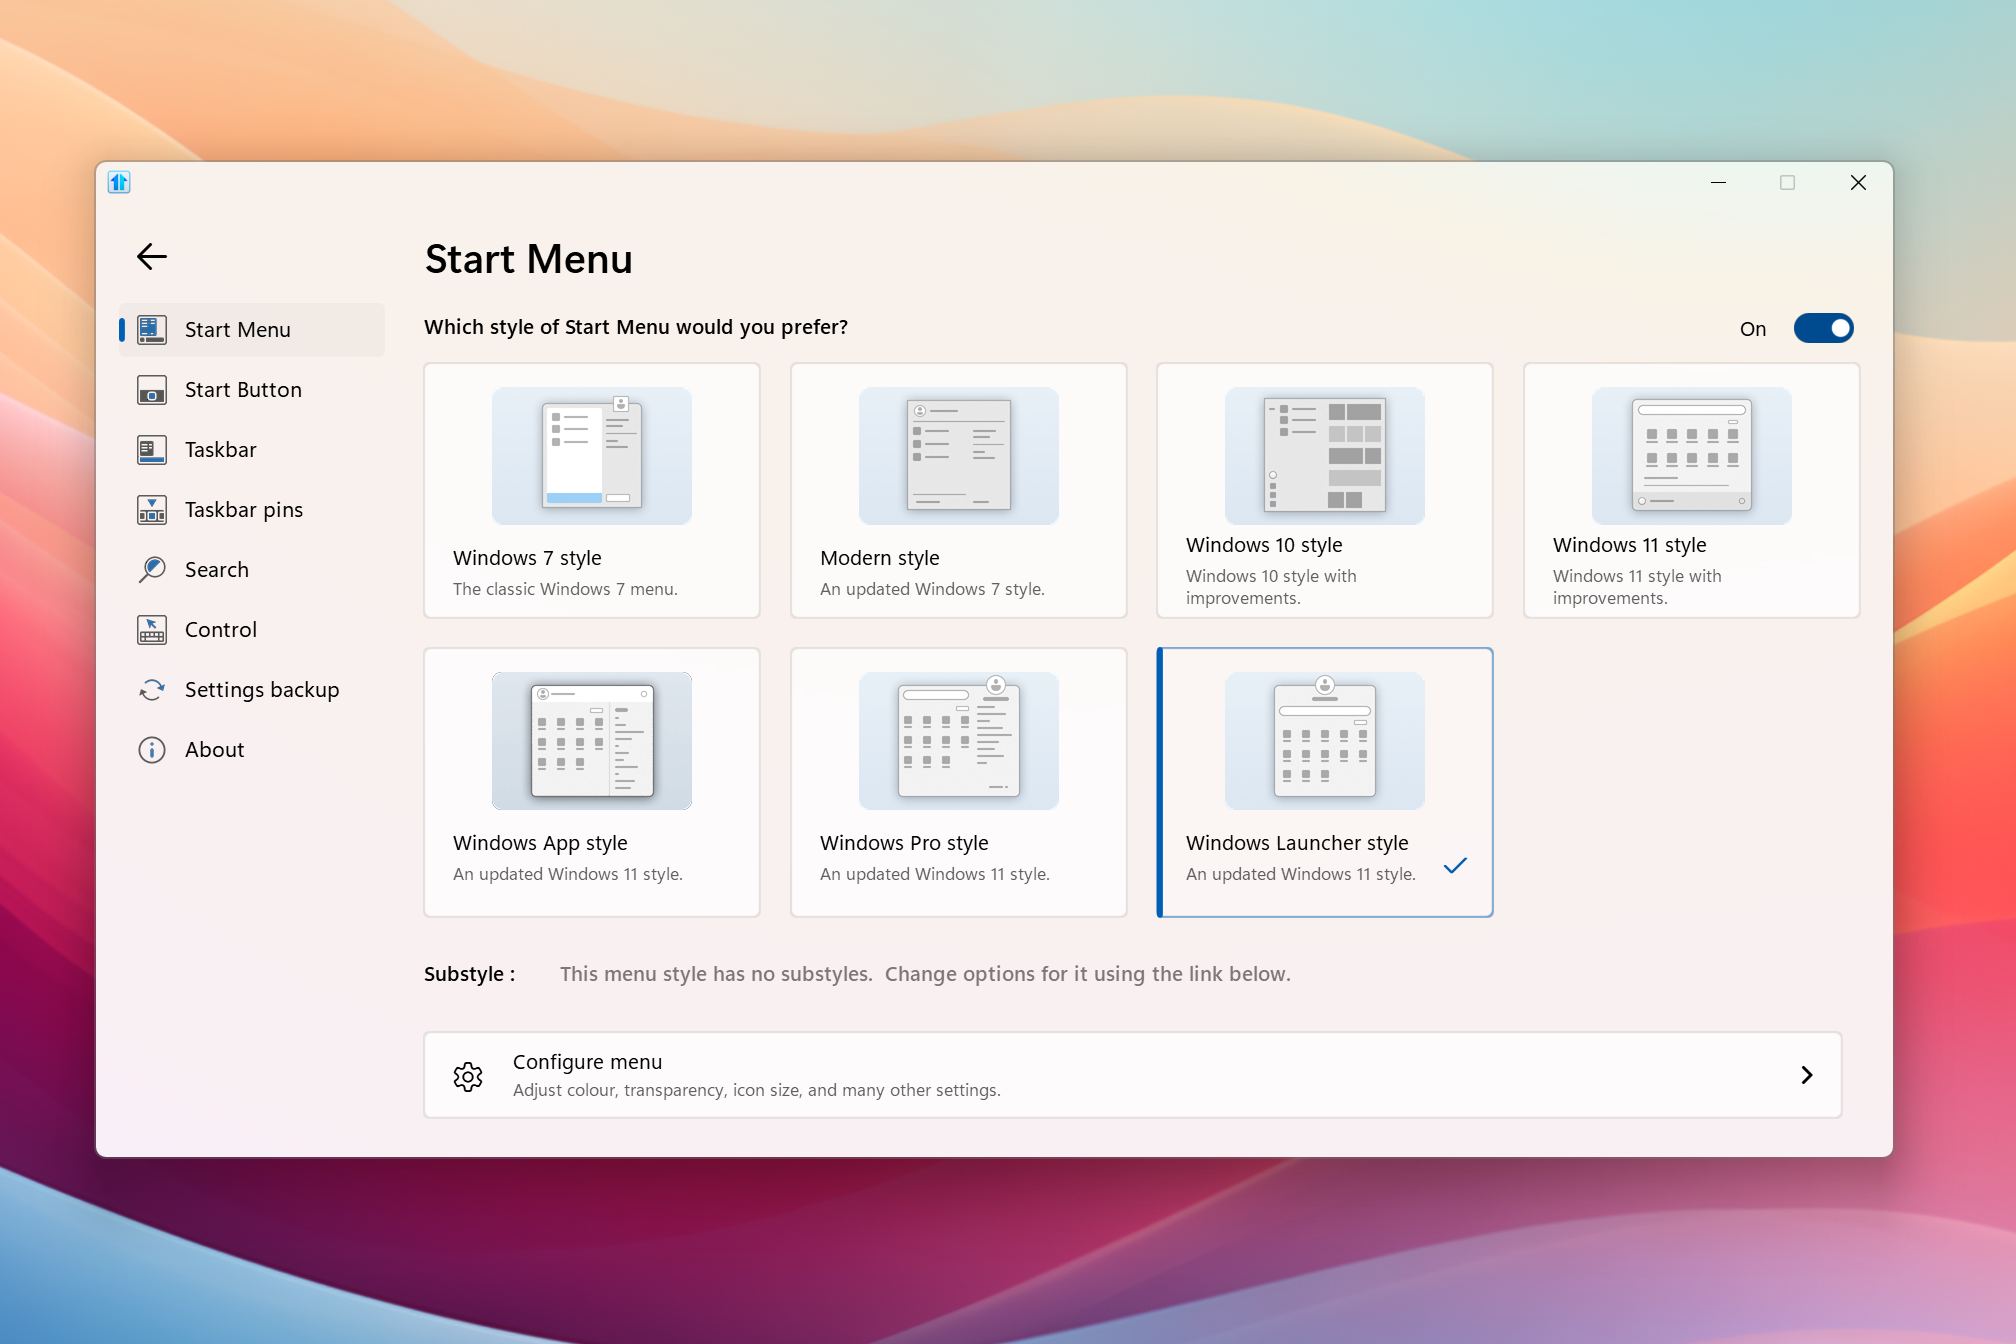 Screenshot of the Start11 Start menu configuration page showing new styles in Start11 v2